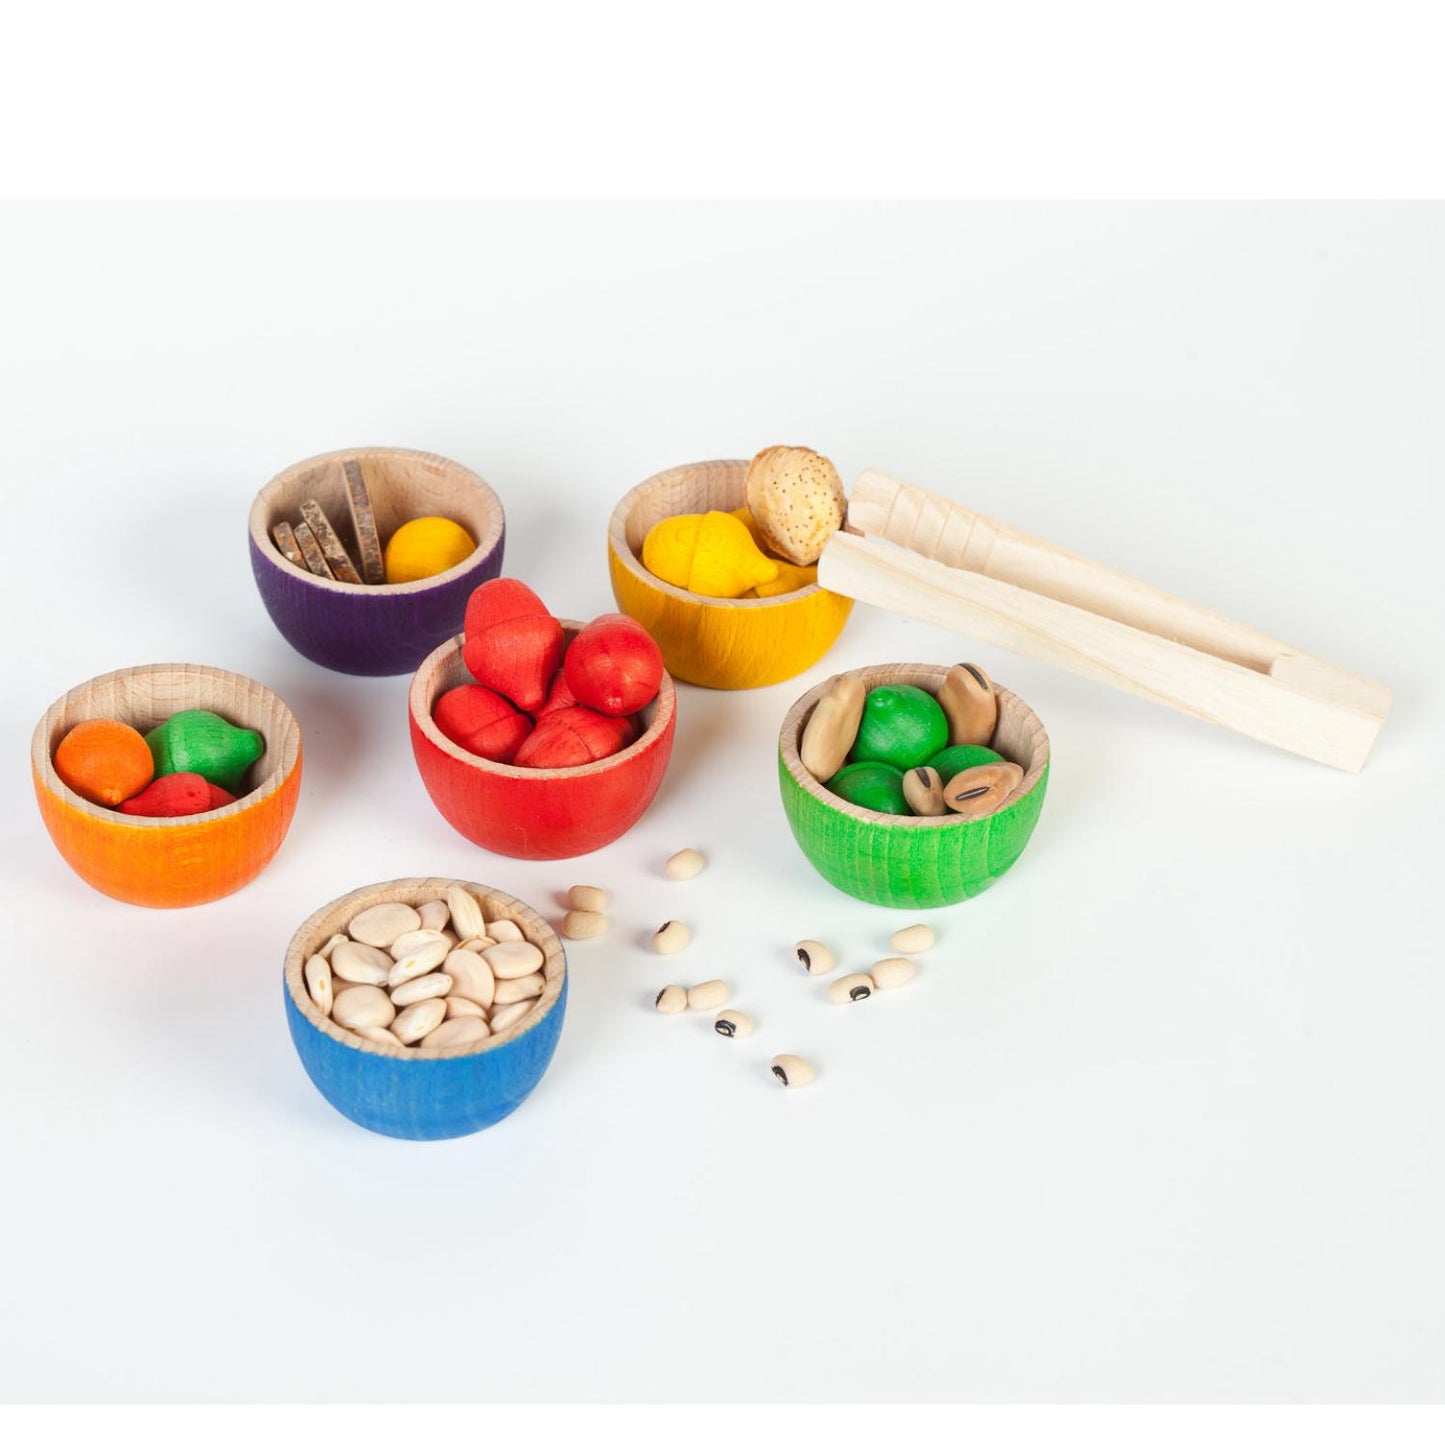 Bowls & Acorns | Wooden Toys for Kids | Open-Ended Play Set